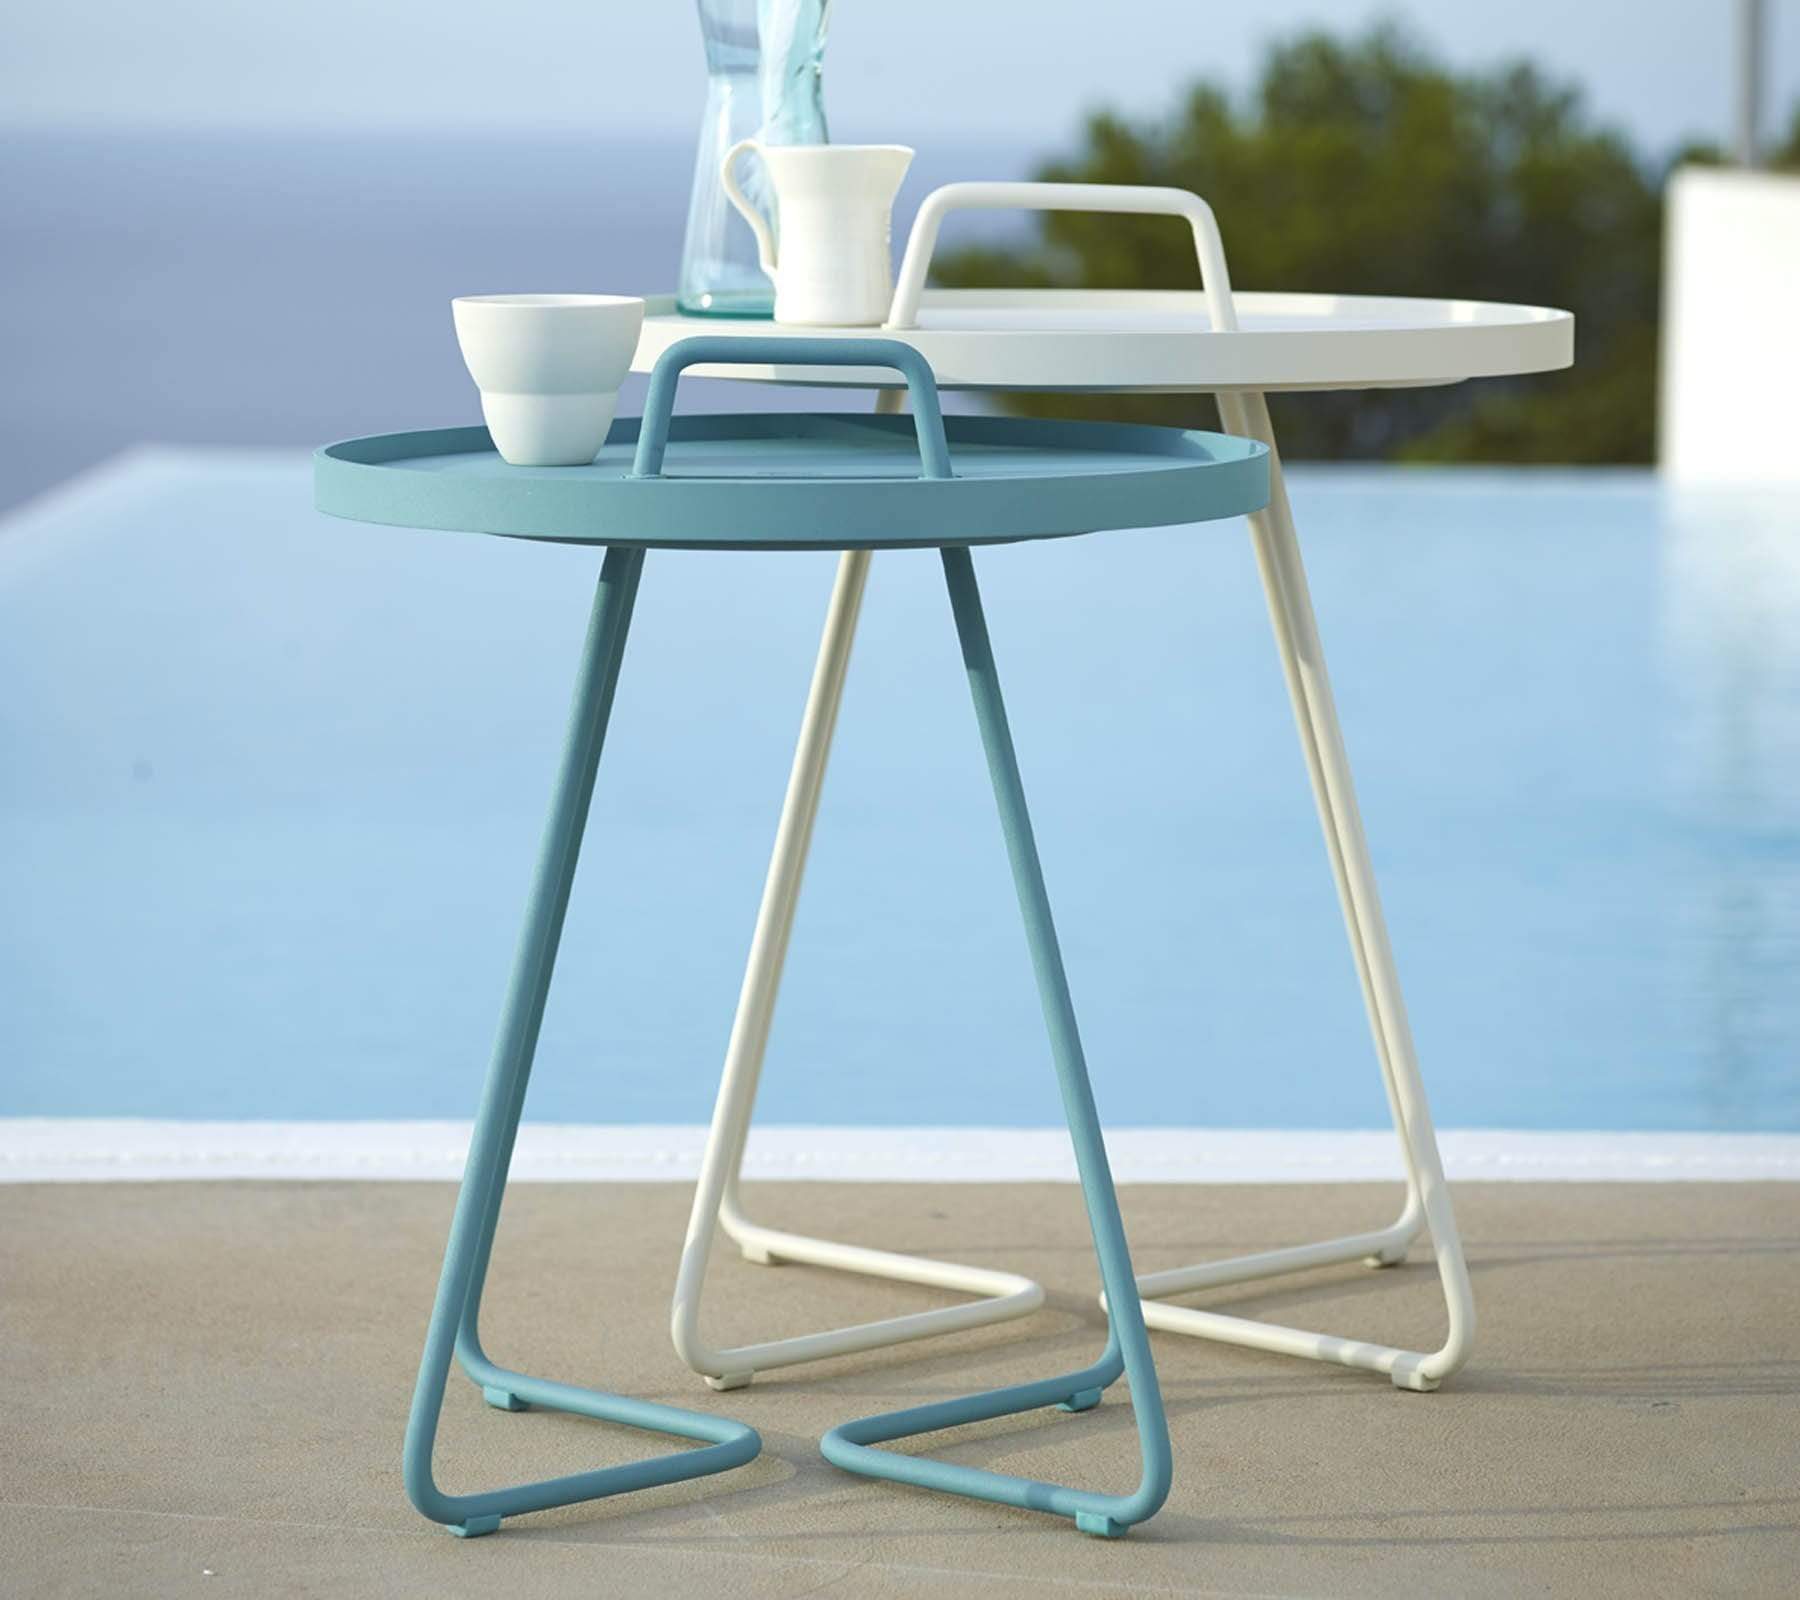 Cane-Line Denmark Outdoor Side Table Cane-Line - On-the-move side table small